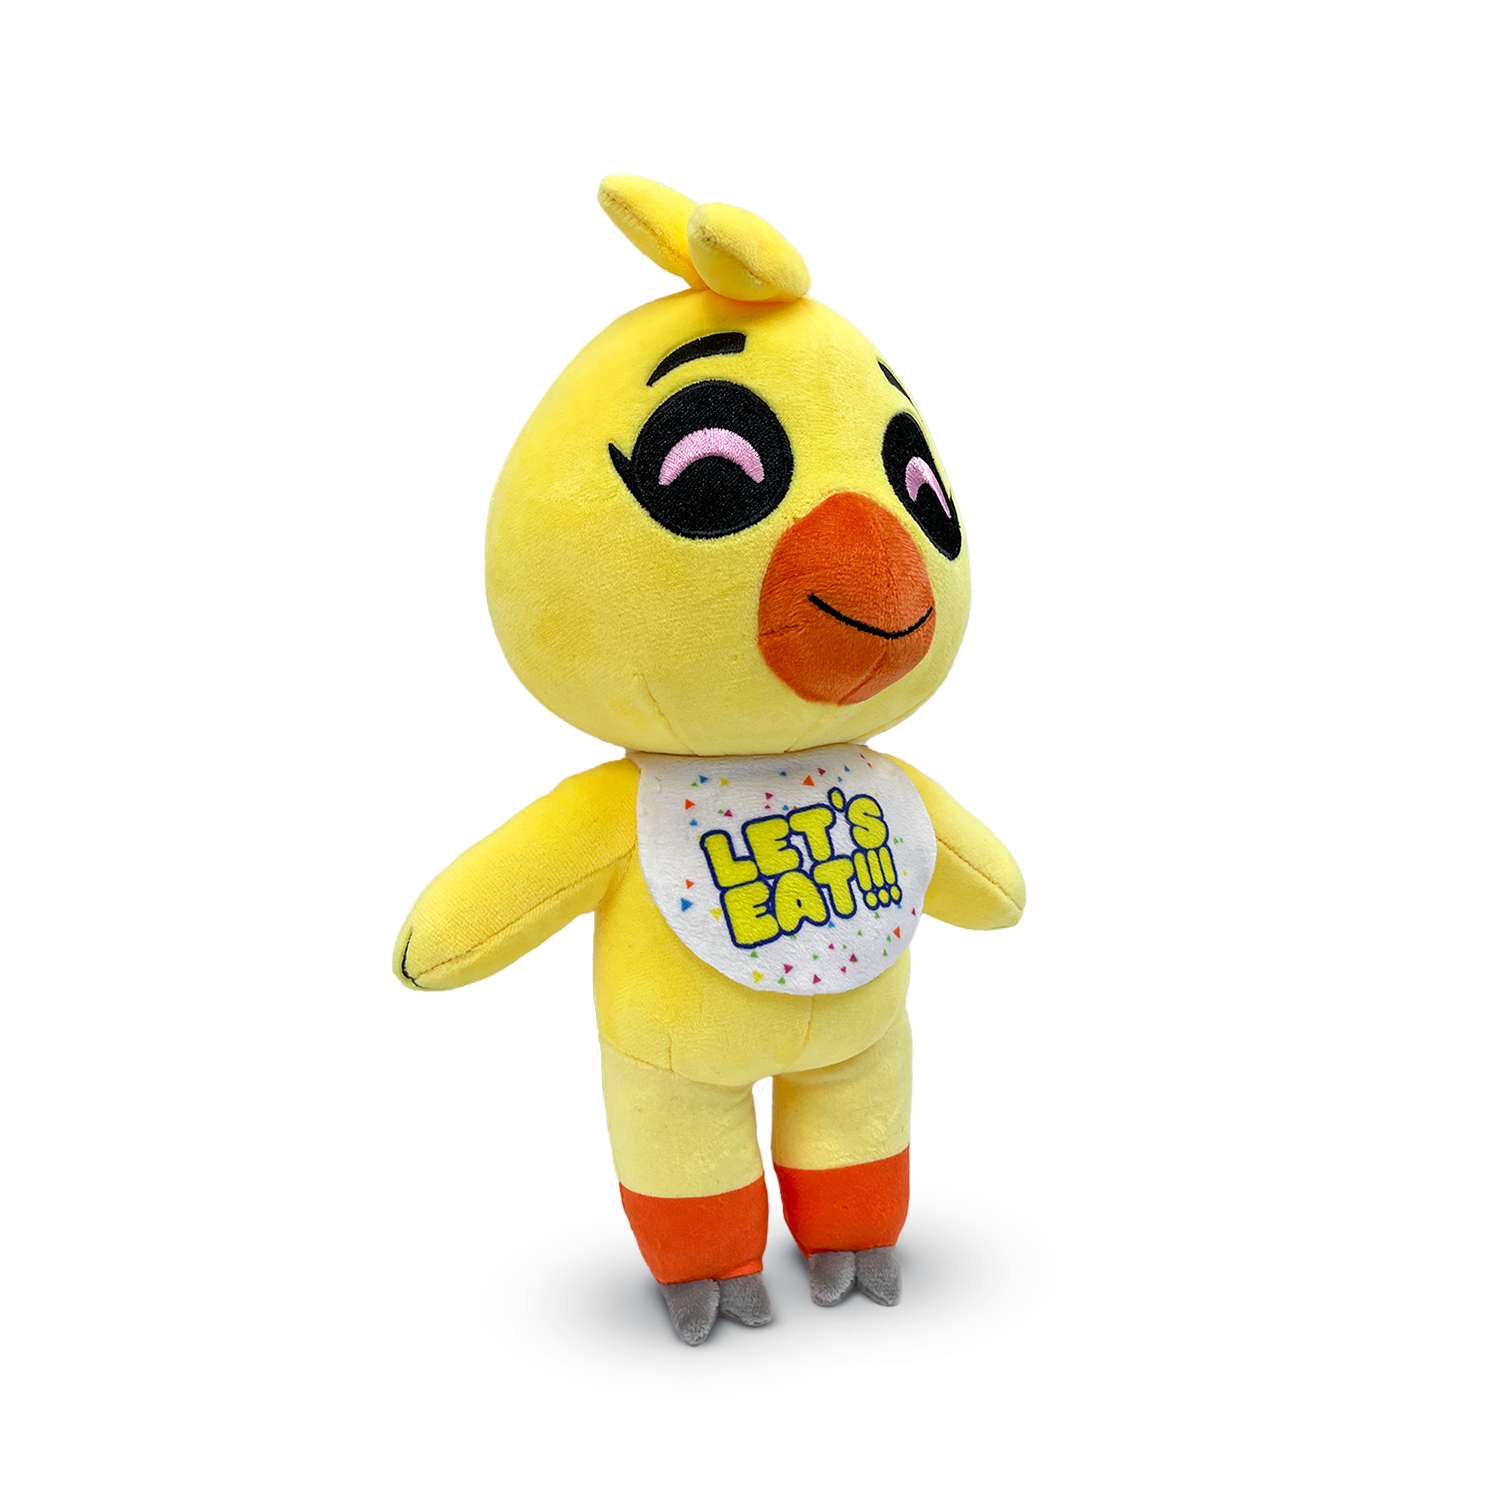  Youtooz Chibi Chica Plush 9 inch, Collectible Plush Stuffed  Animal from Five Nights at Freddy's (Exclusive) by The Youtooz FNAF  Collection : Toys & Games